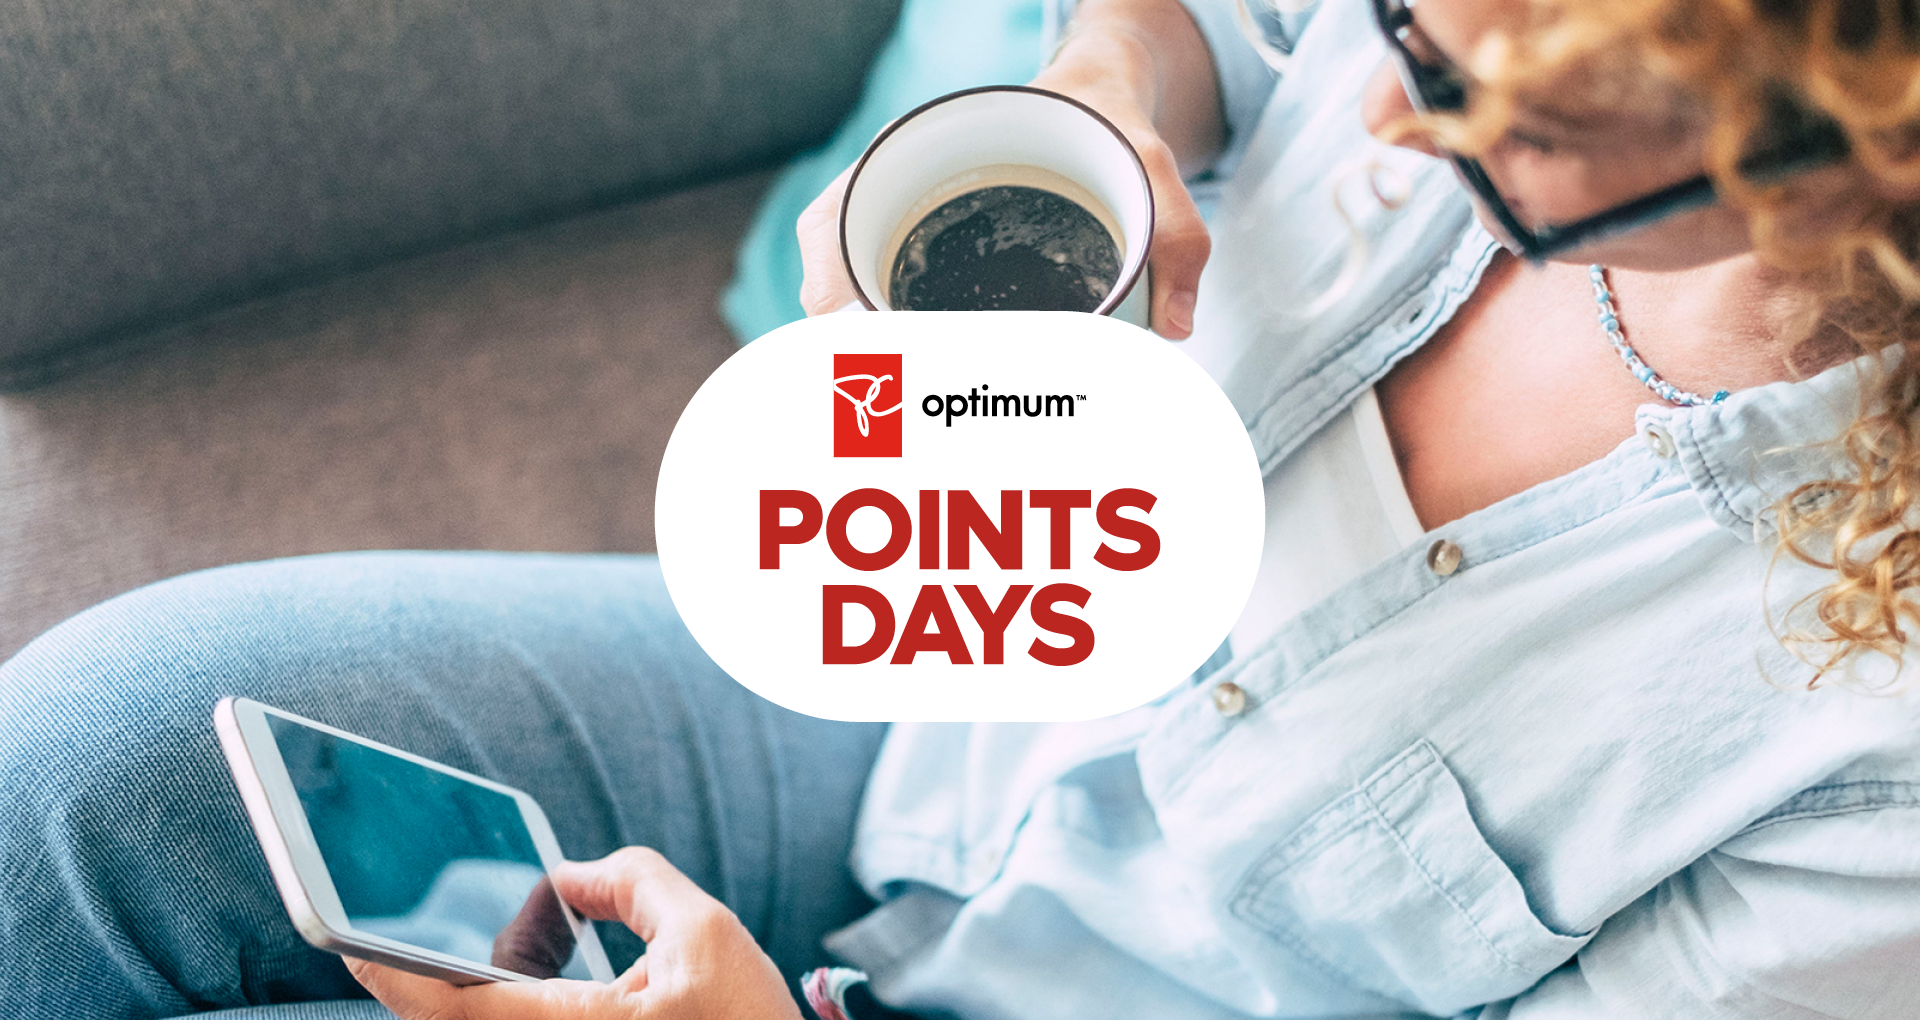 Purchase a $100 Apple Gift Card, get $15 back in PC Optimum points